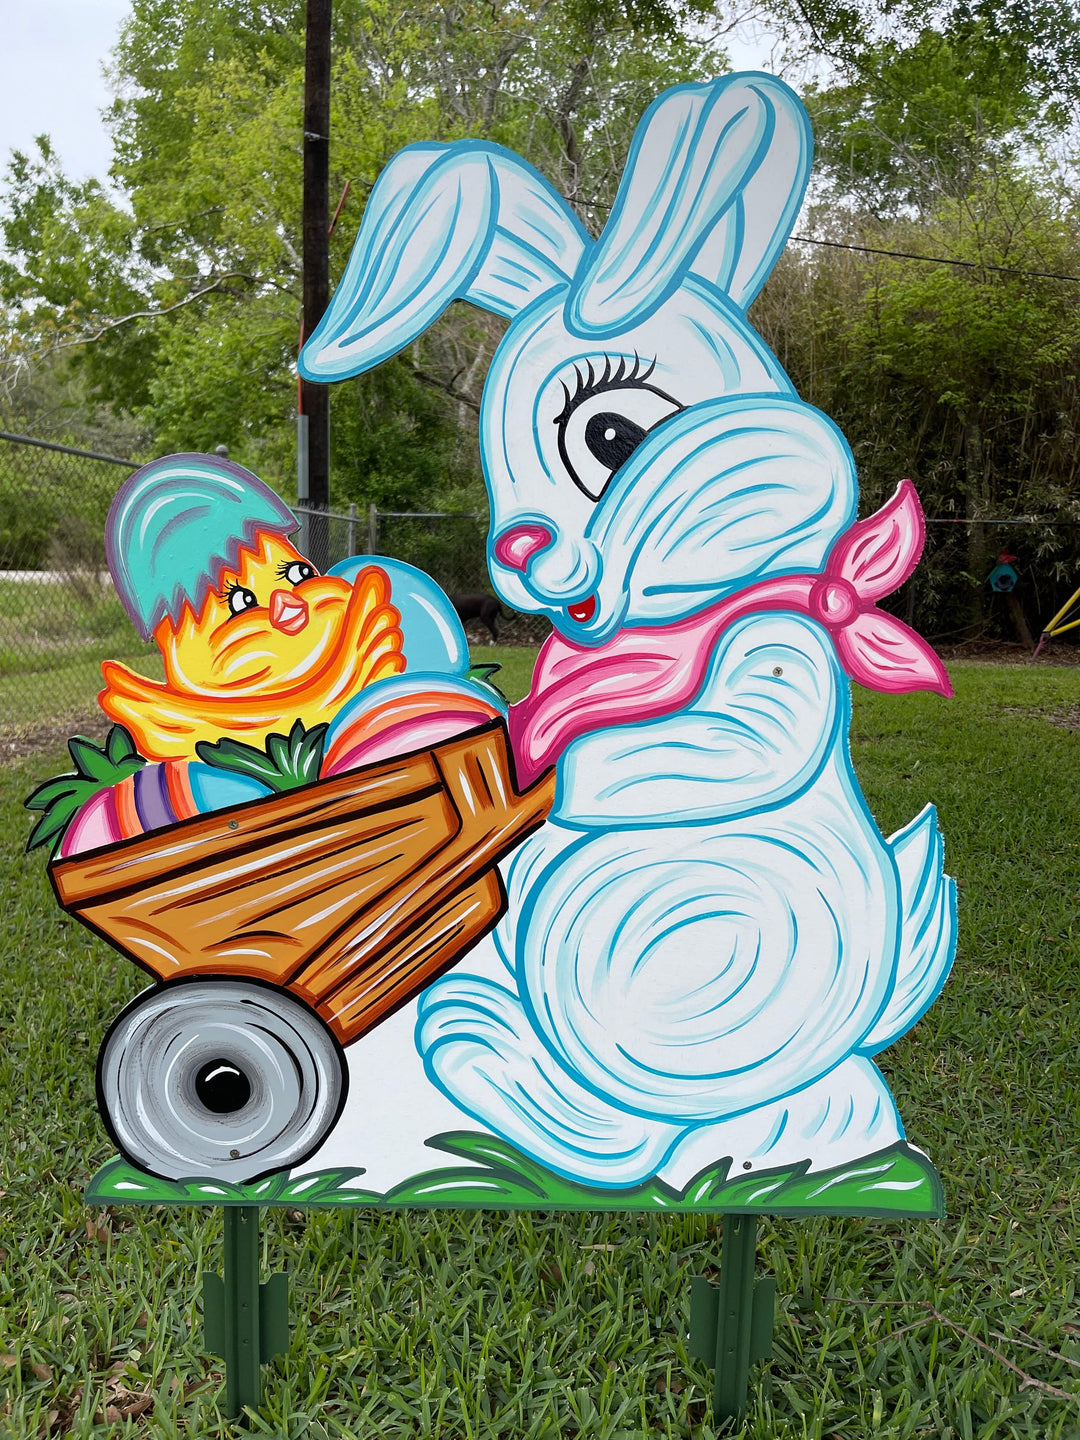 Easter bunny pushes cart of eggs yard art decoration